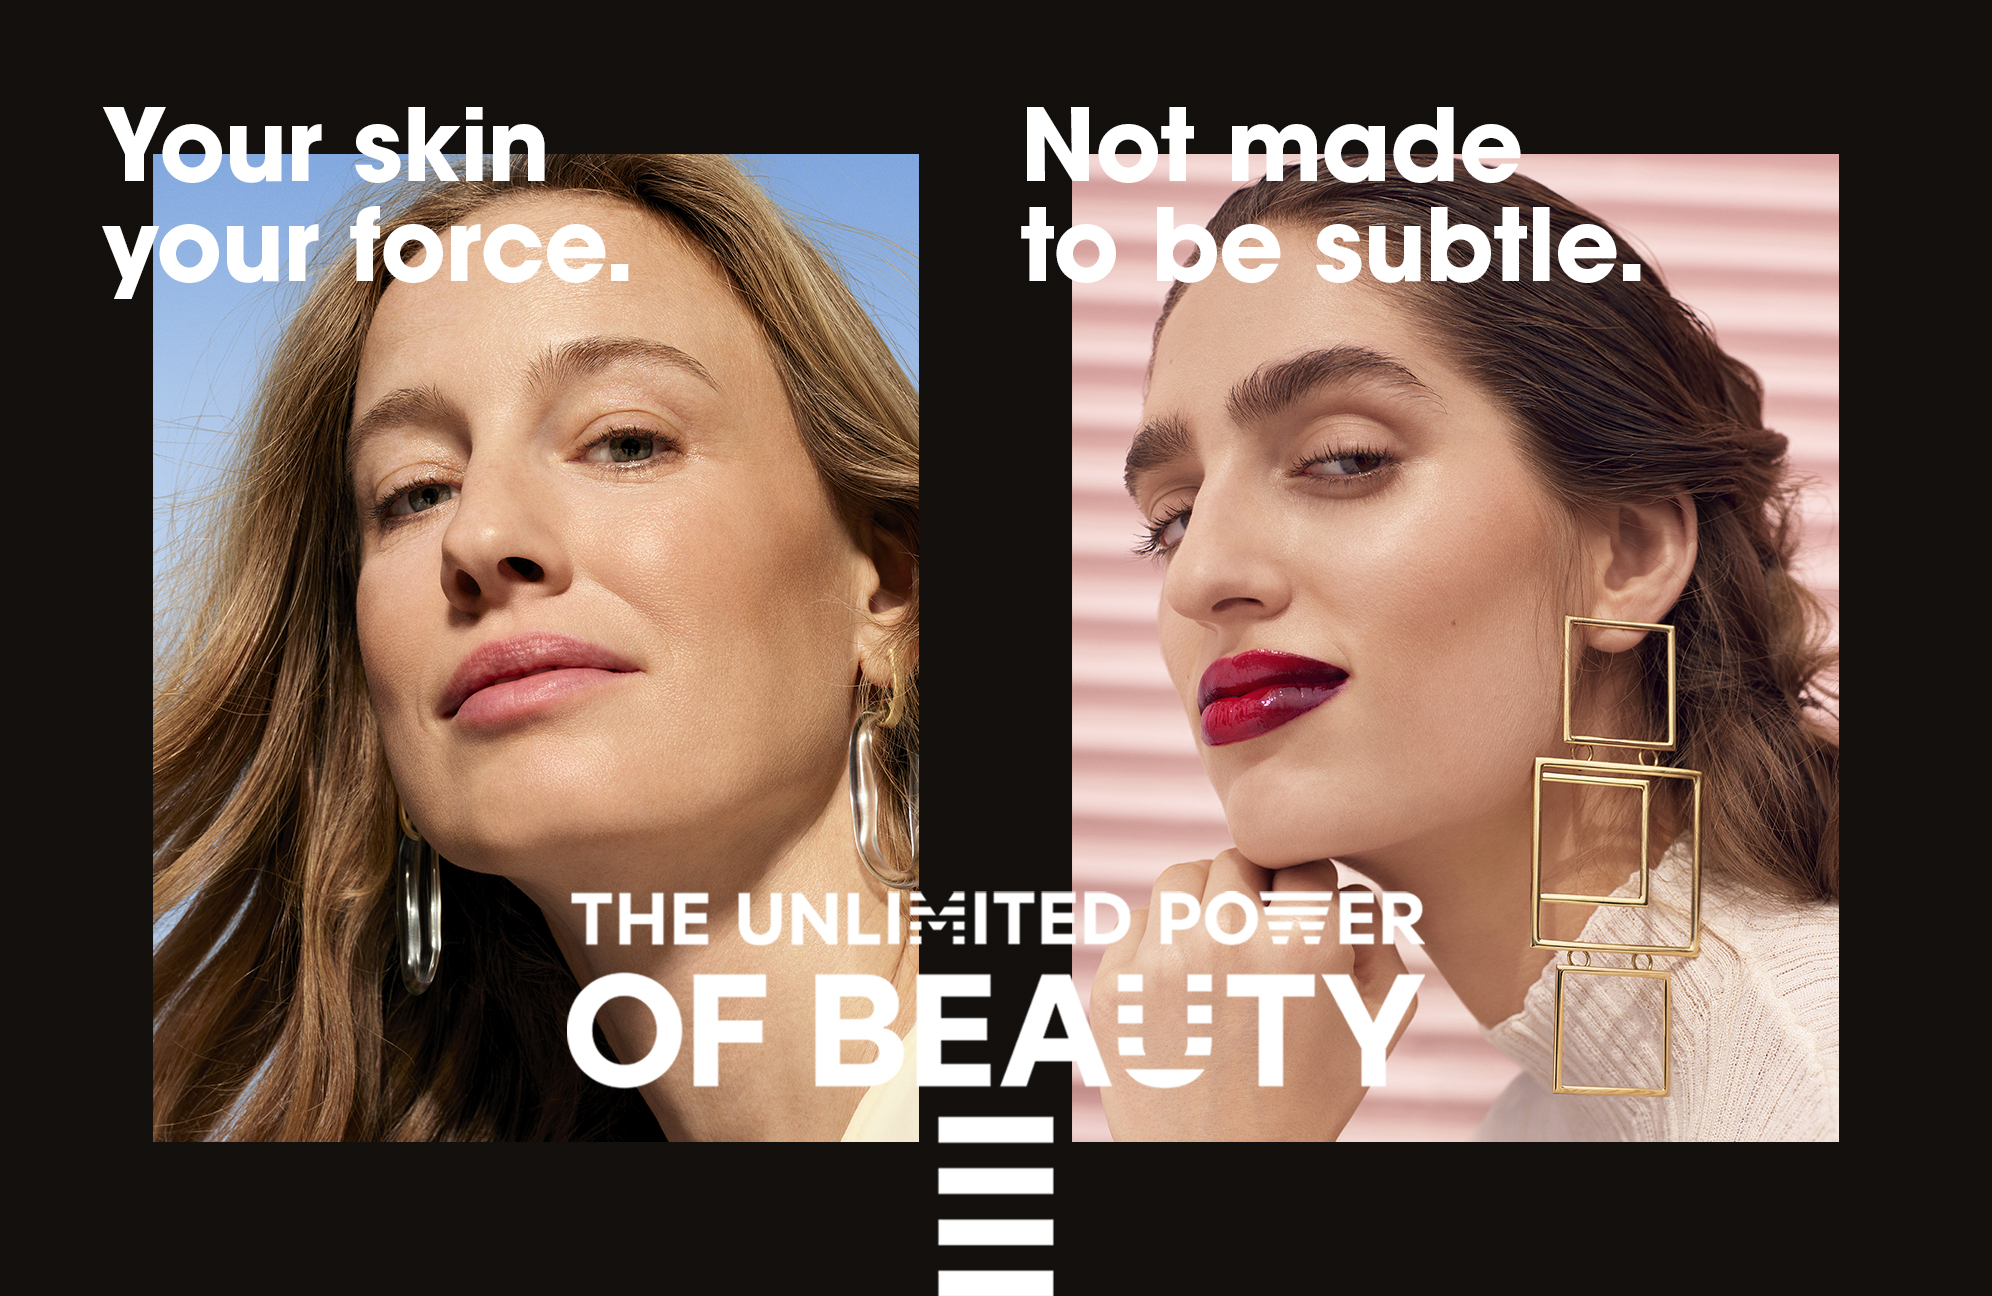 LVMH on X: With the help of the @Sephora Accelerate Program, 3 inspiring  women launched their own beauty product brands, in line with the Corporate  Social Responsability: @HOKARAN, @MonBeautyMix and @abhati! #VivaTech #